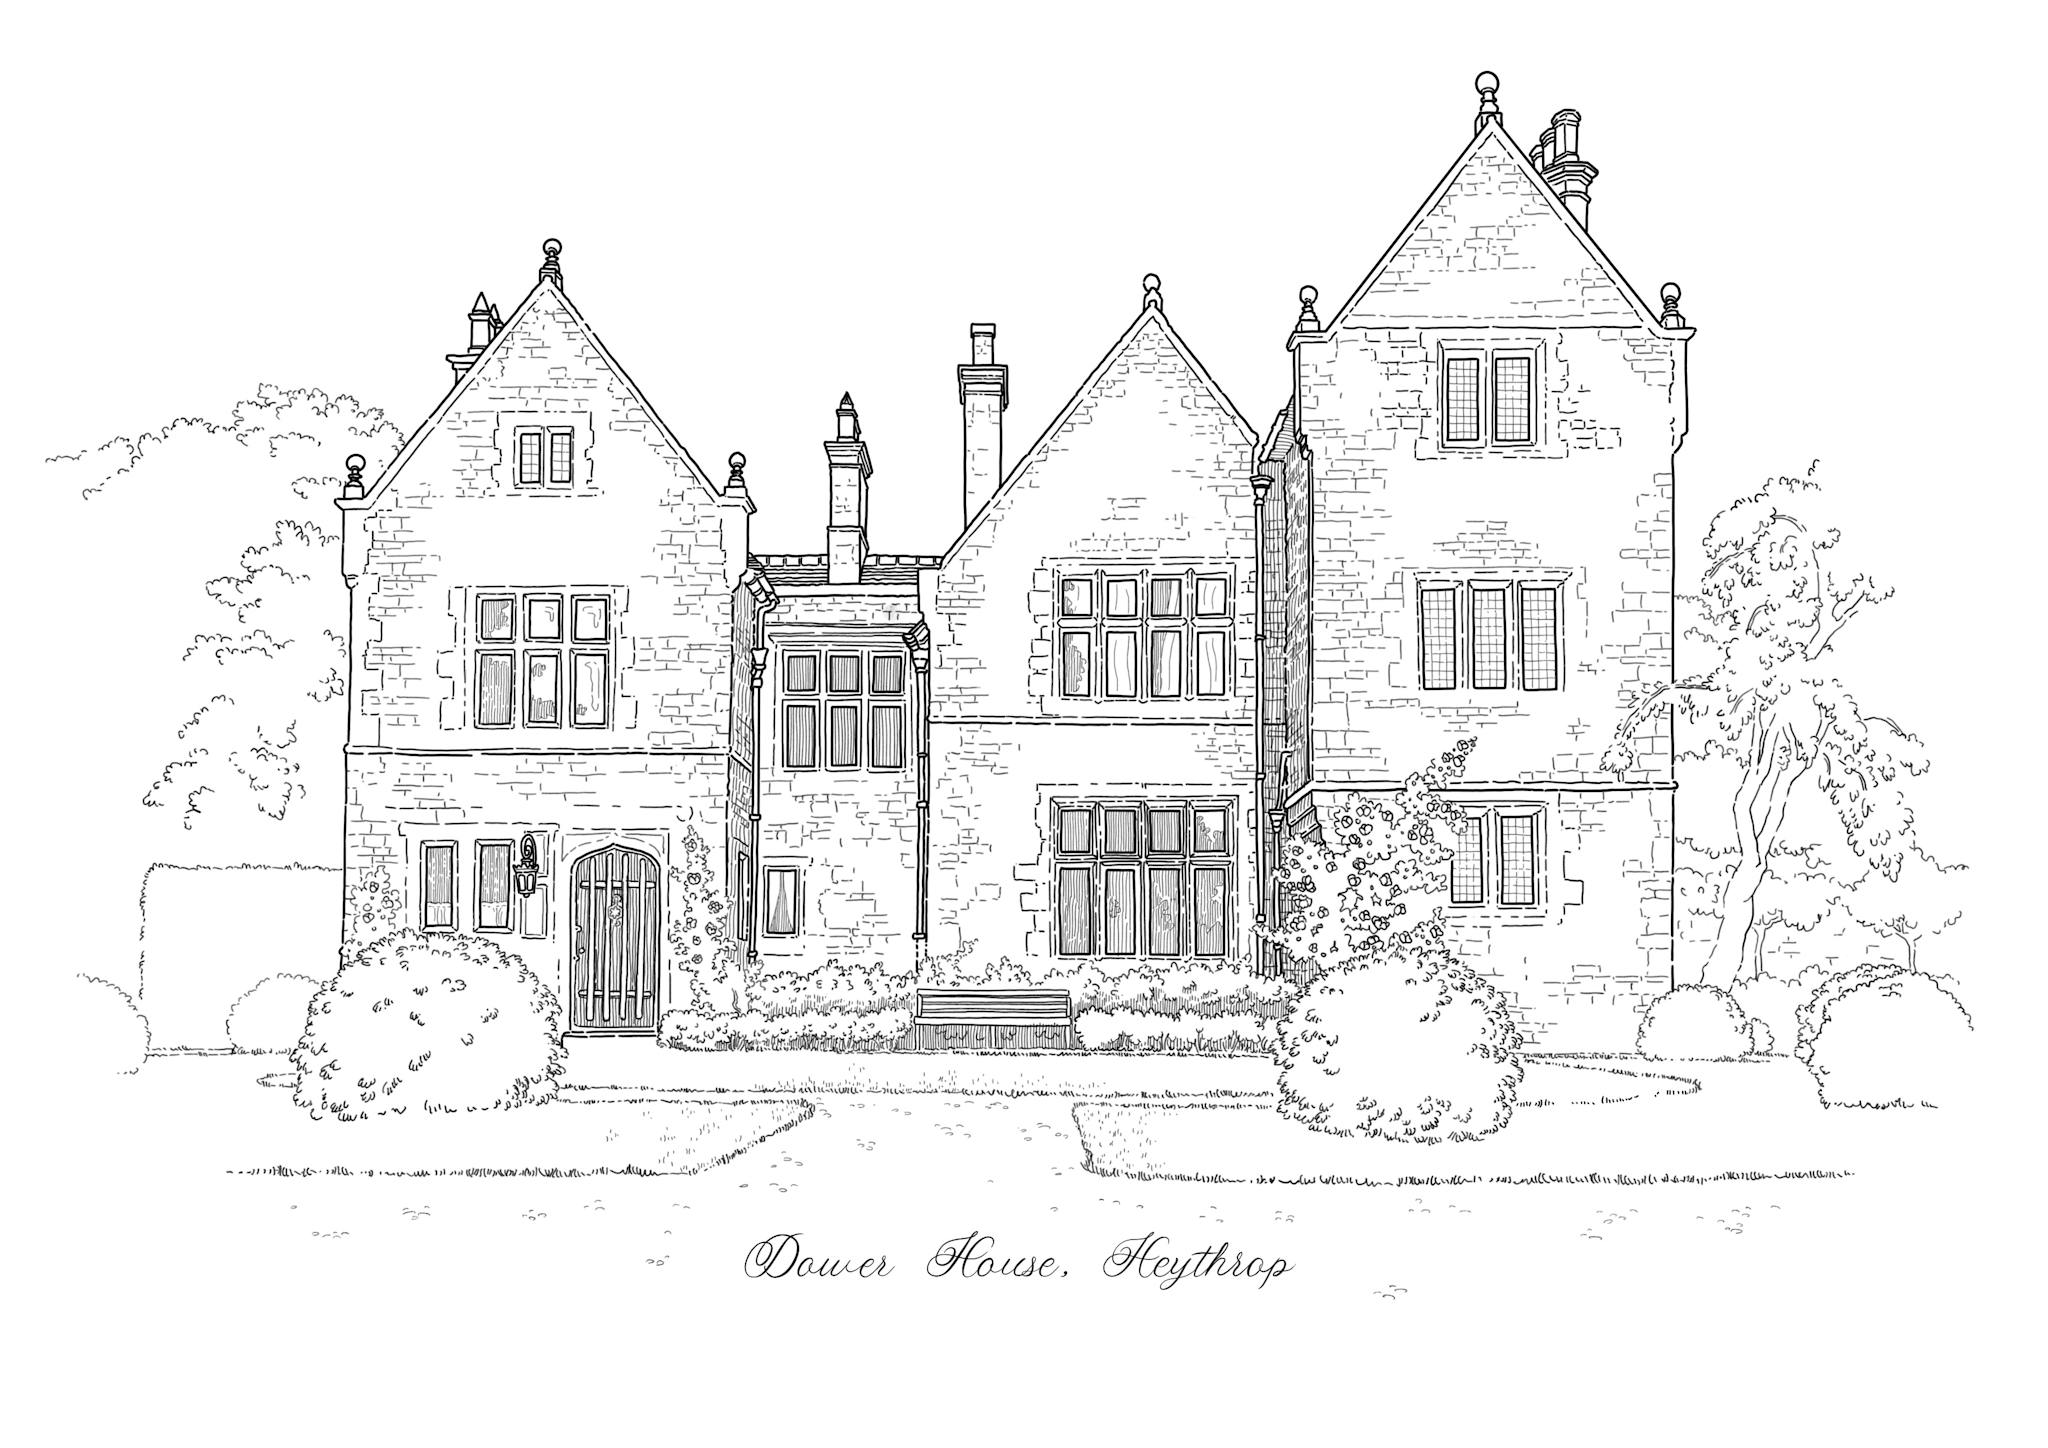 Dower House mansion illustrated in black and white